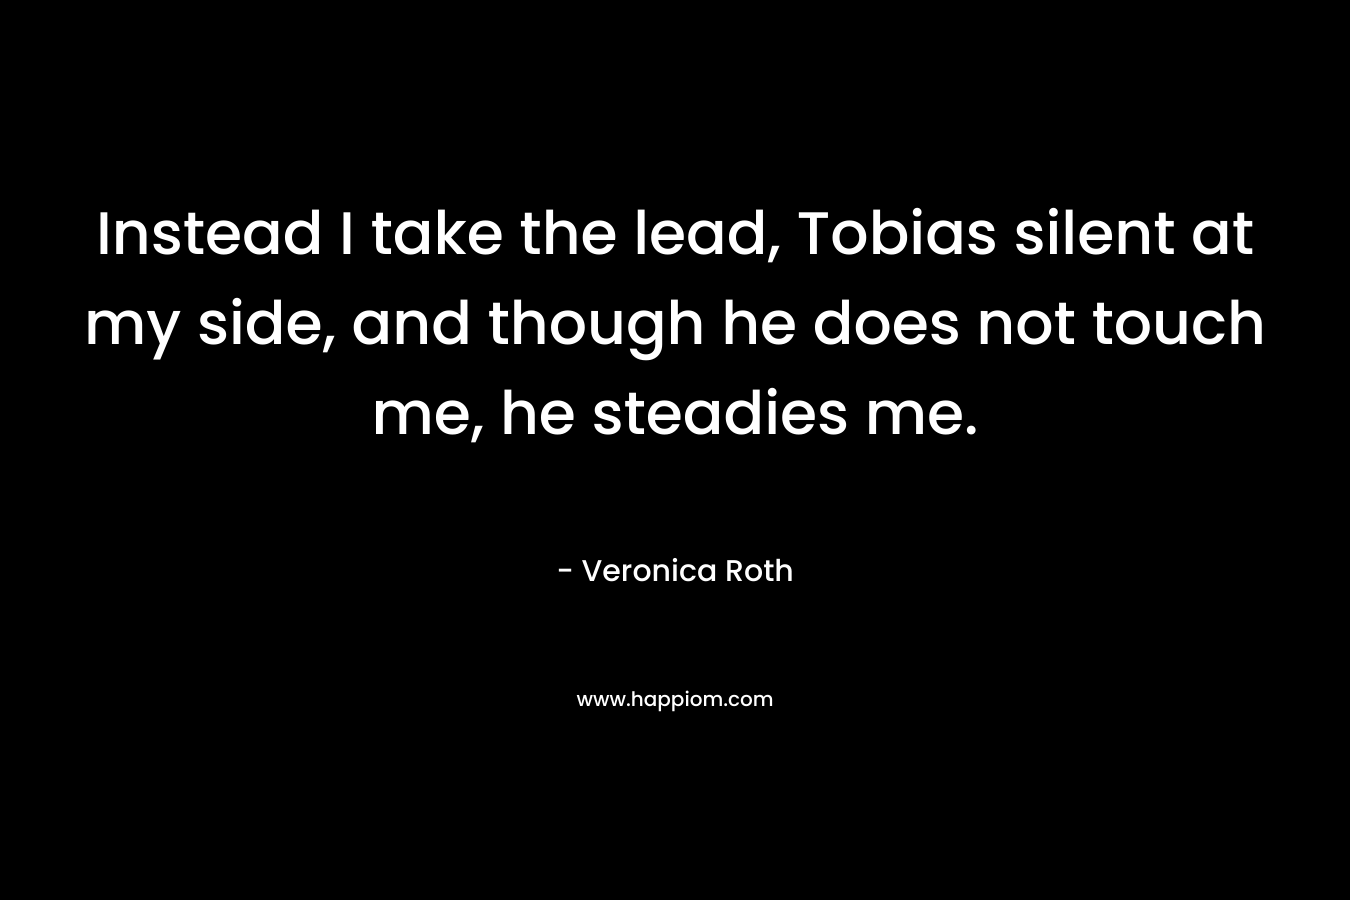 Instead I take the lead, Tobias silent at my side, and though he does not touch me, he steadies me.